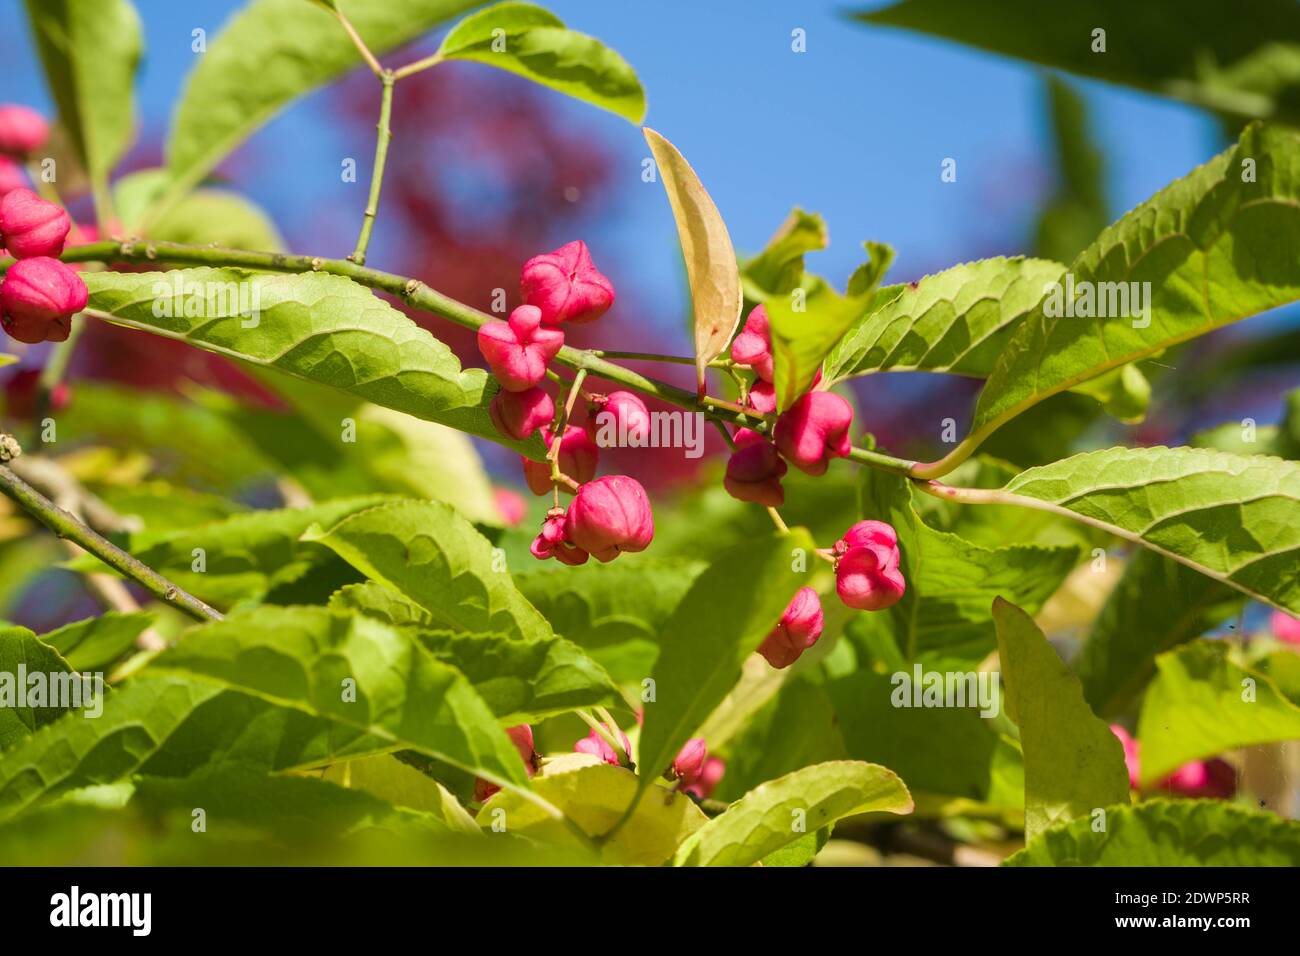 Chinese Spindle (Euonymus hamiltonianus). Queenswood Arboretum Hereford Herefordshire UK. October 2019 Stock Photo